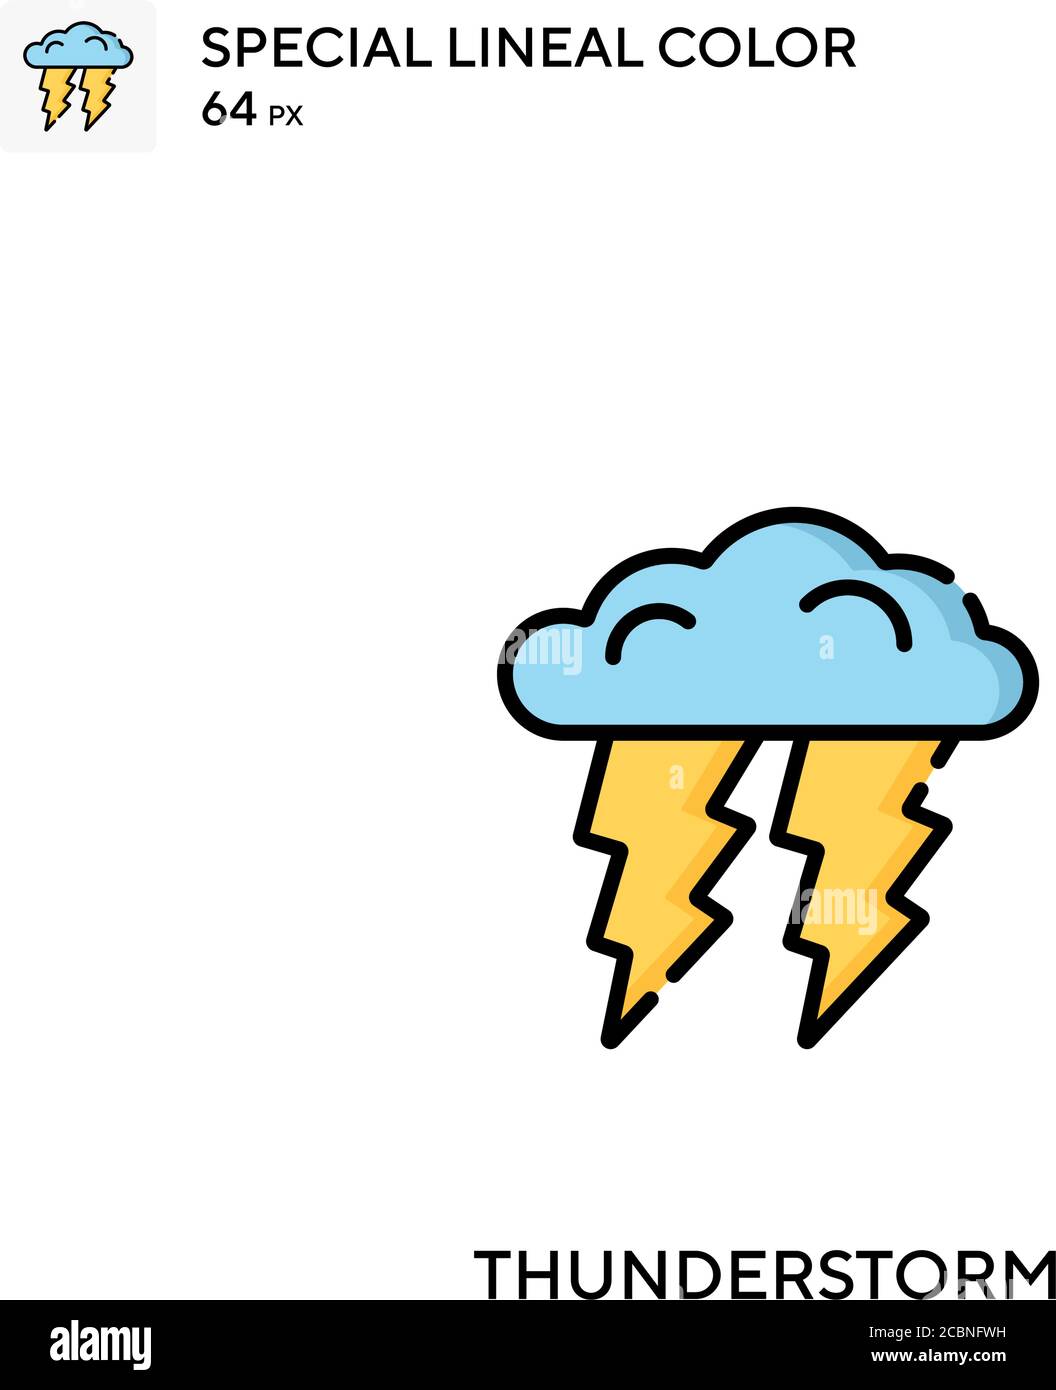 Thunderstorm Special lineal color vector icon. Thunderstorm icons for your business project Stock Vector